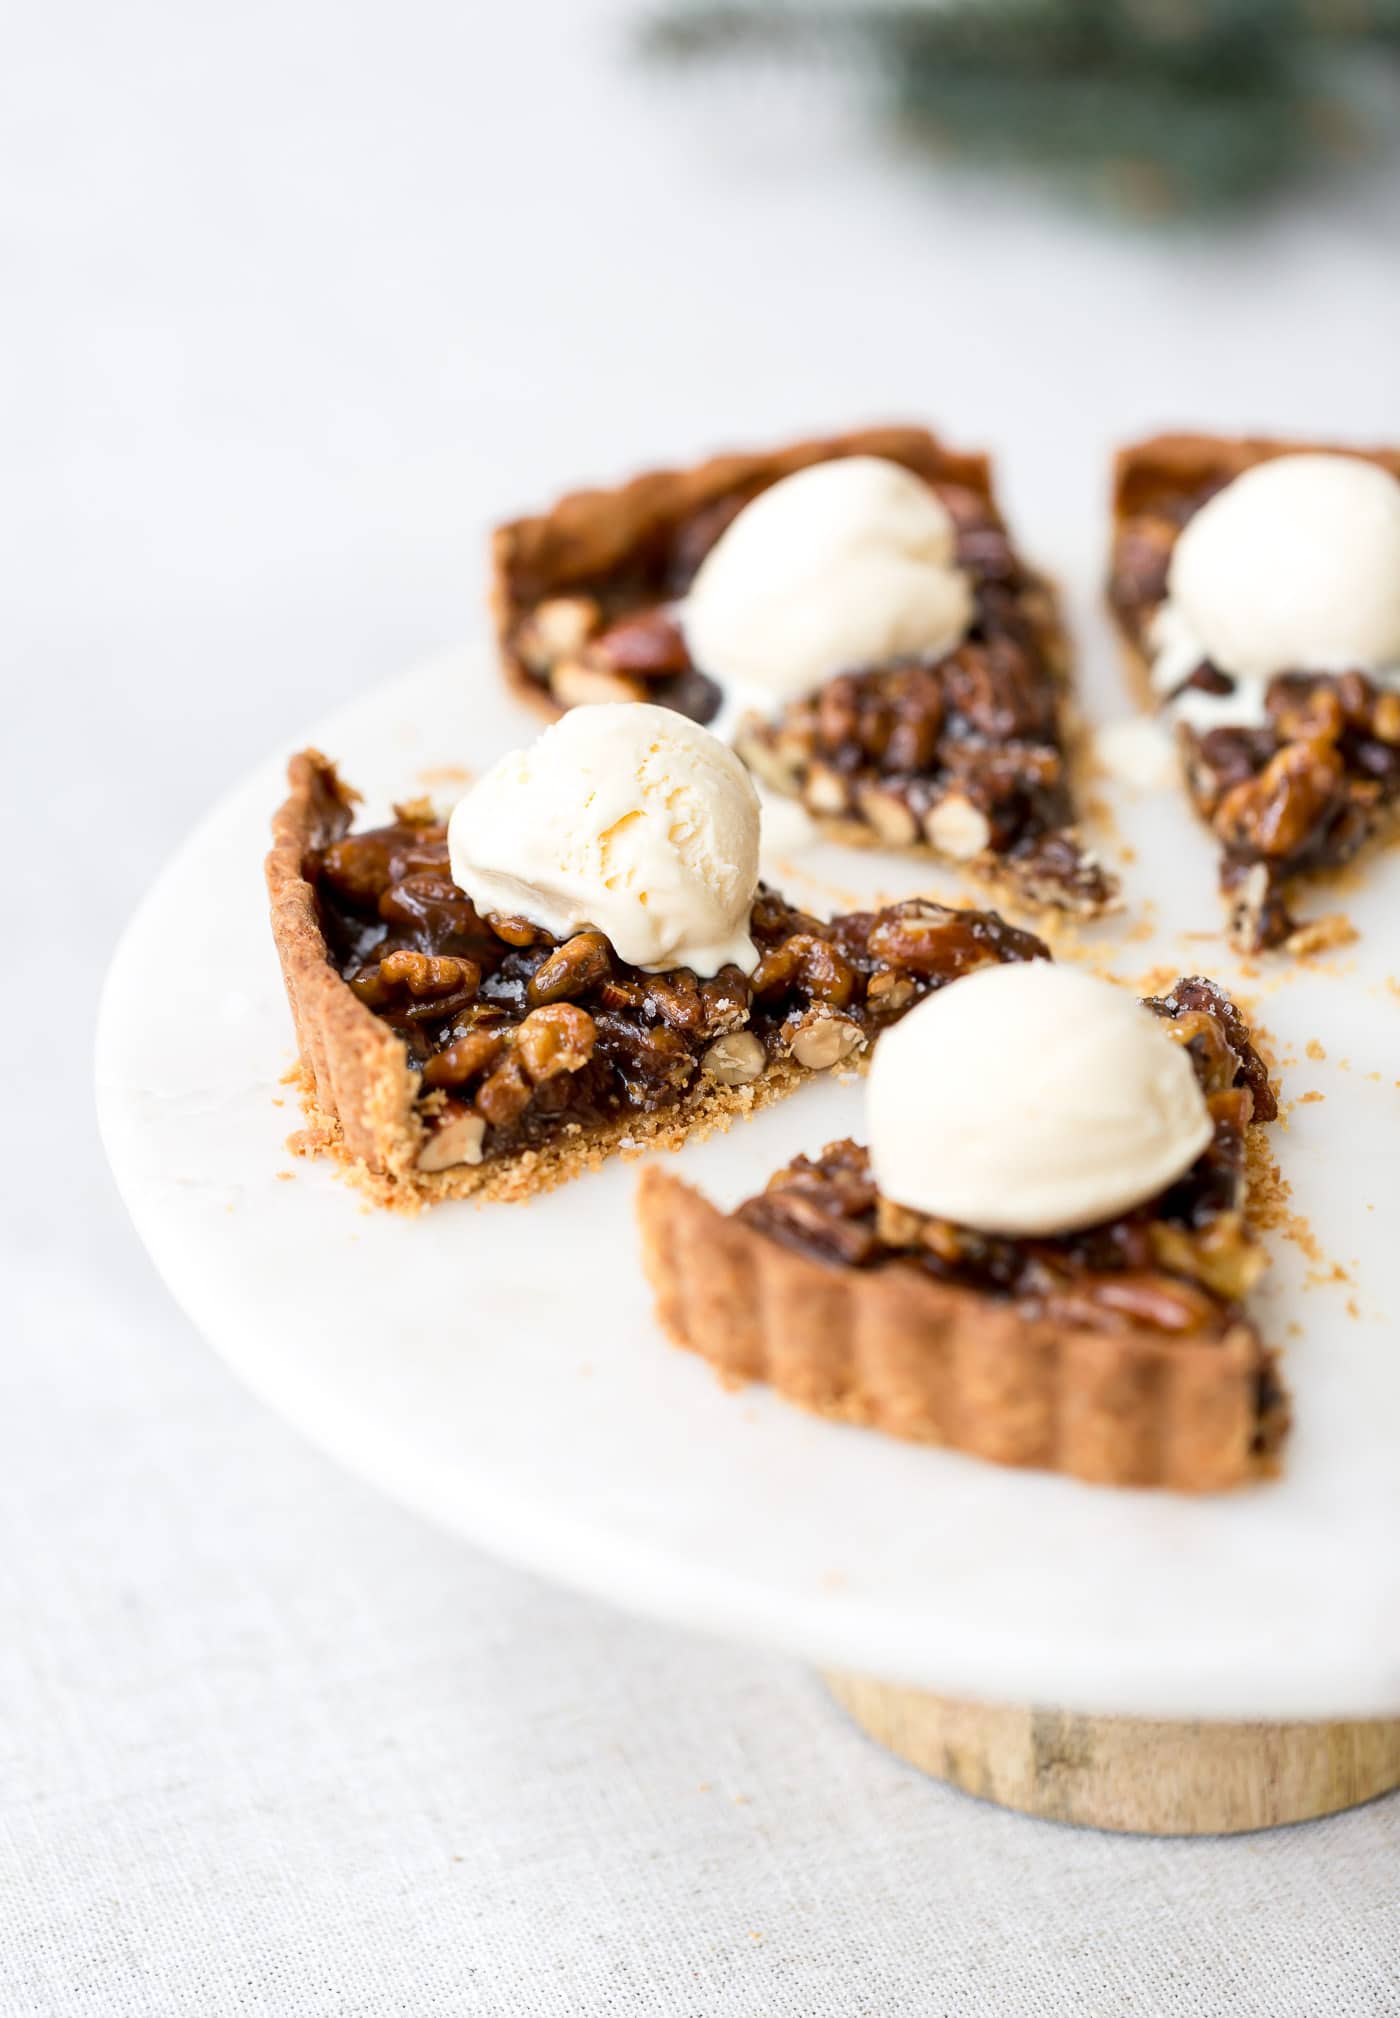 A few slices of caramel nut tart are topped off with a scoop of vanilla ice cream.